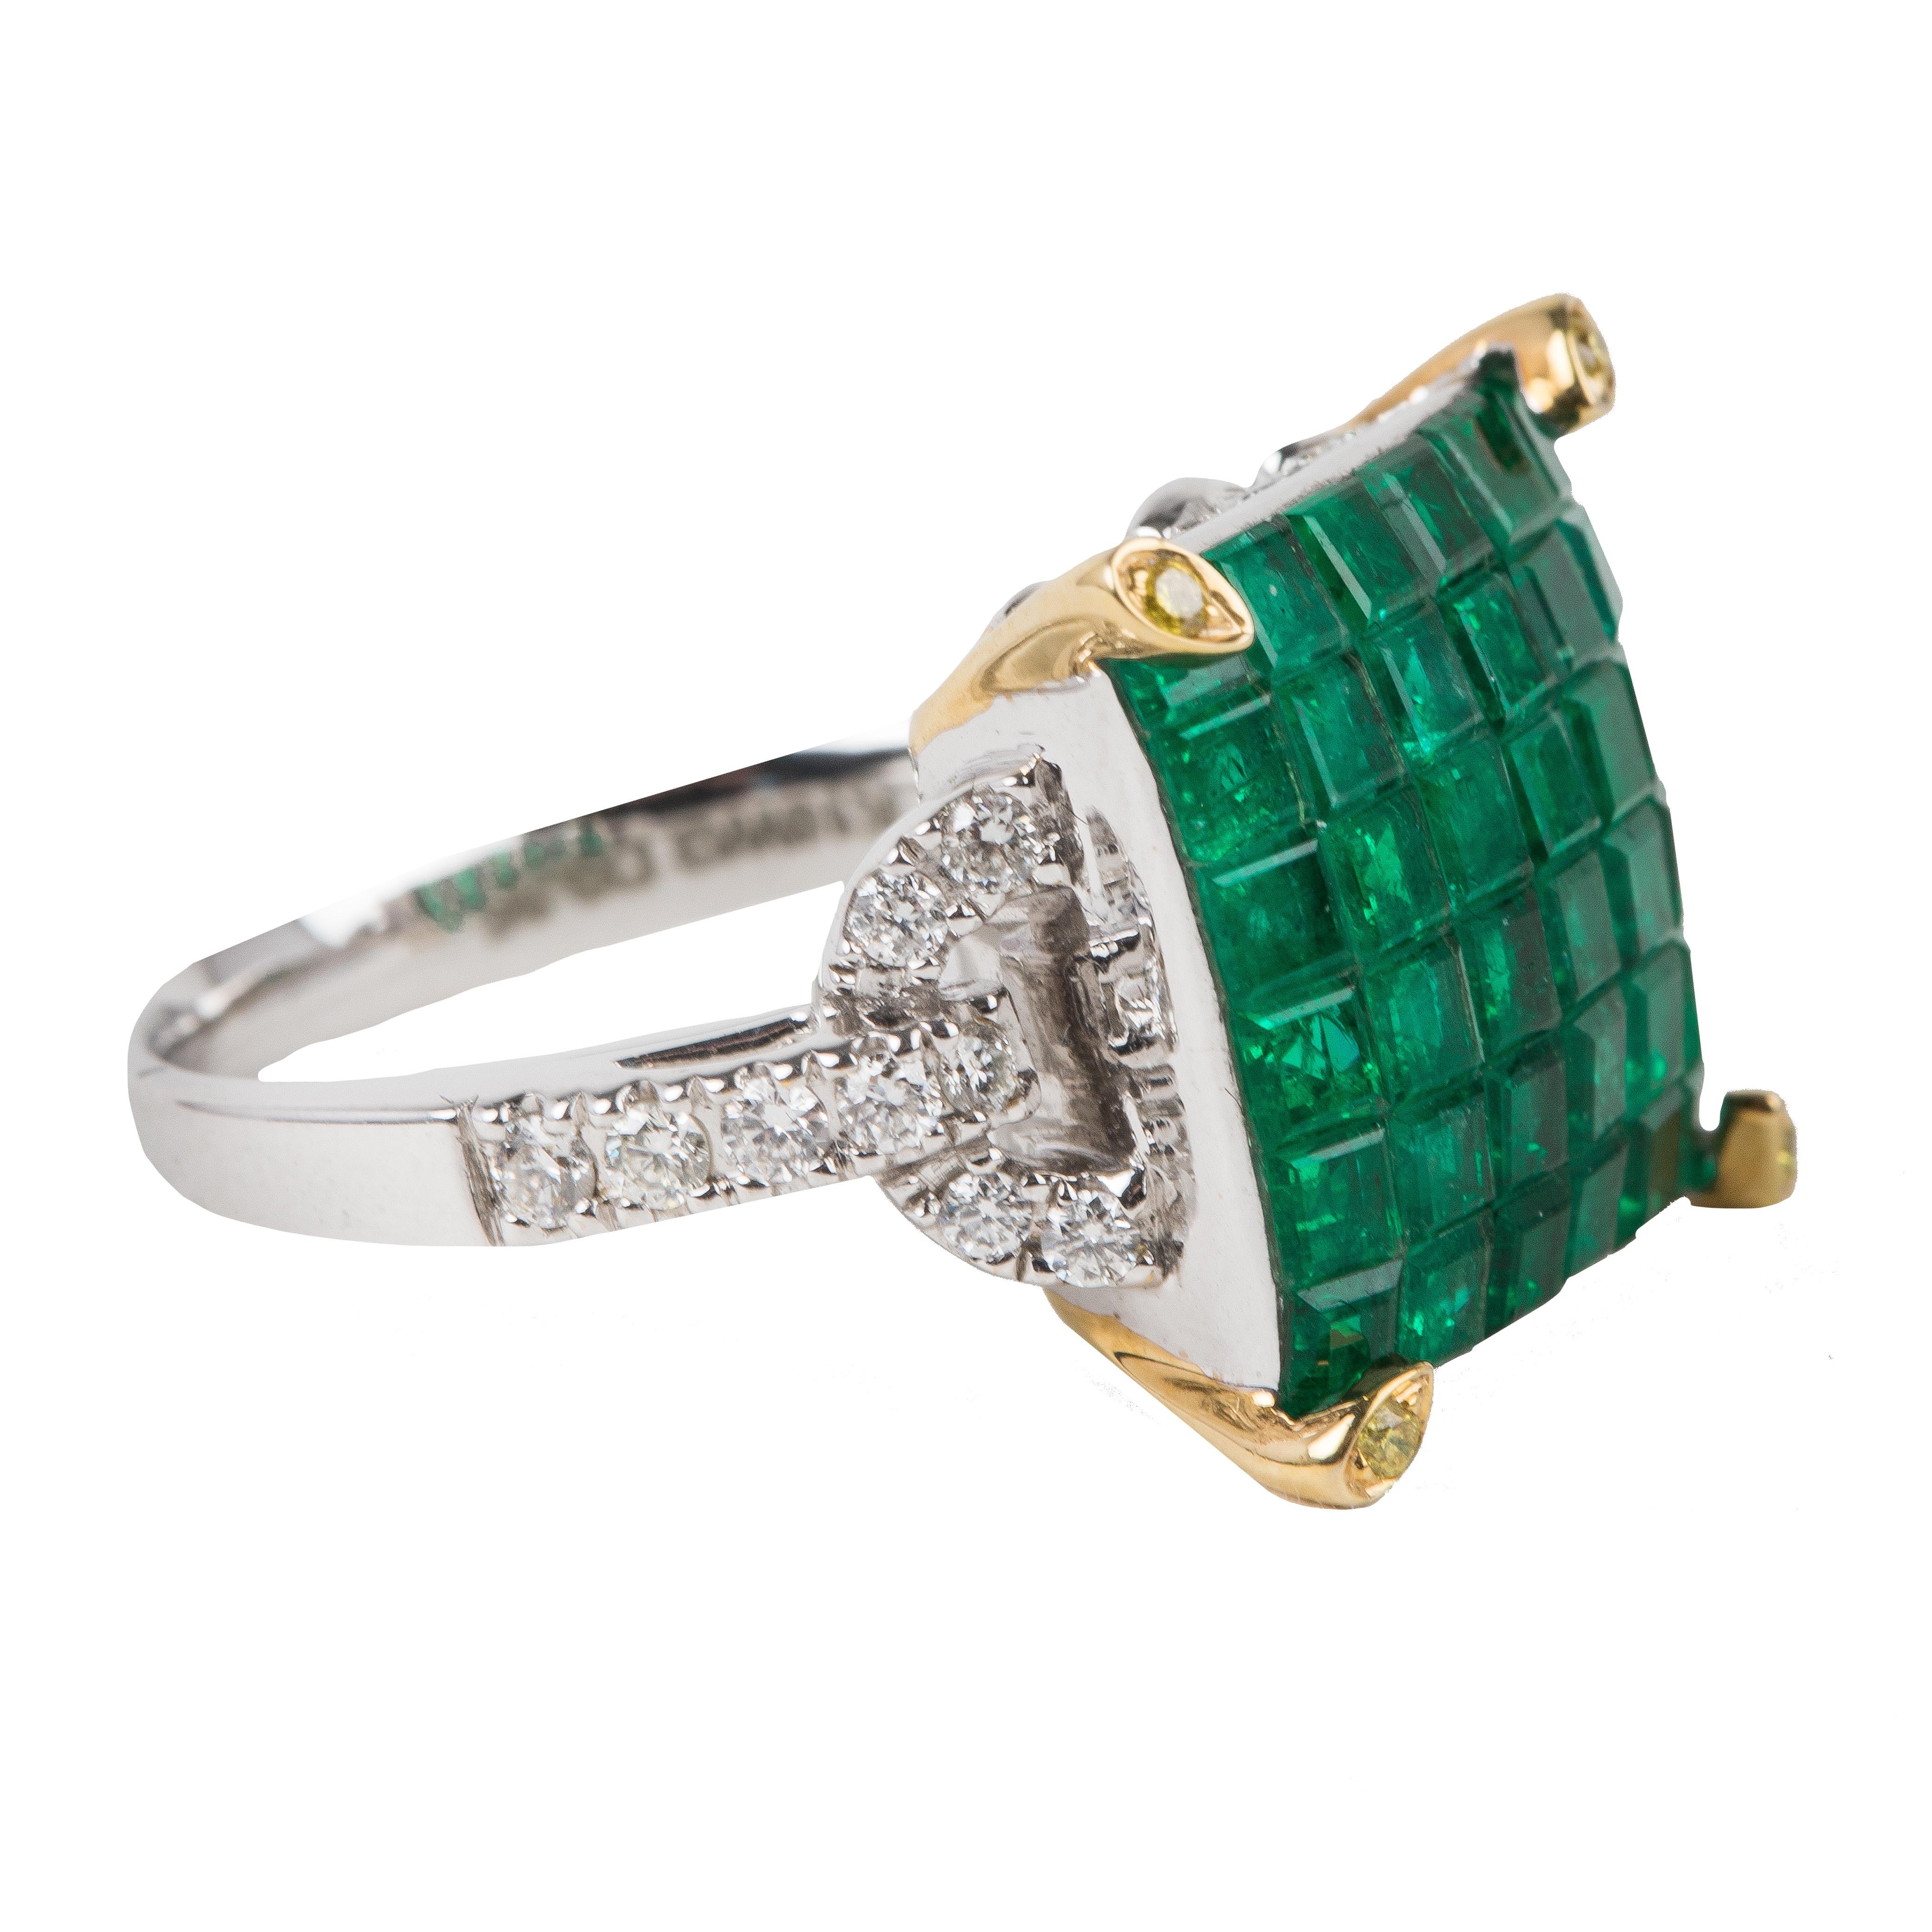 This emerald ring is comprised of 36 stones that have been invisibly set in the ring with gold-tone lobster prongs. This ring is surrounded by diamonds. 